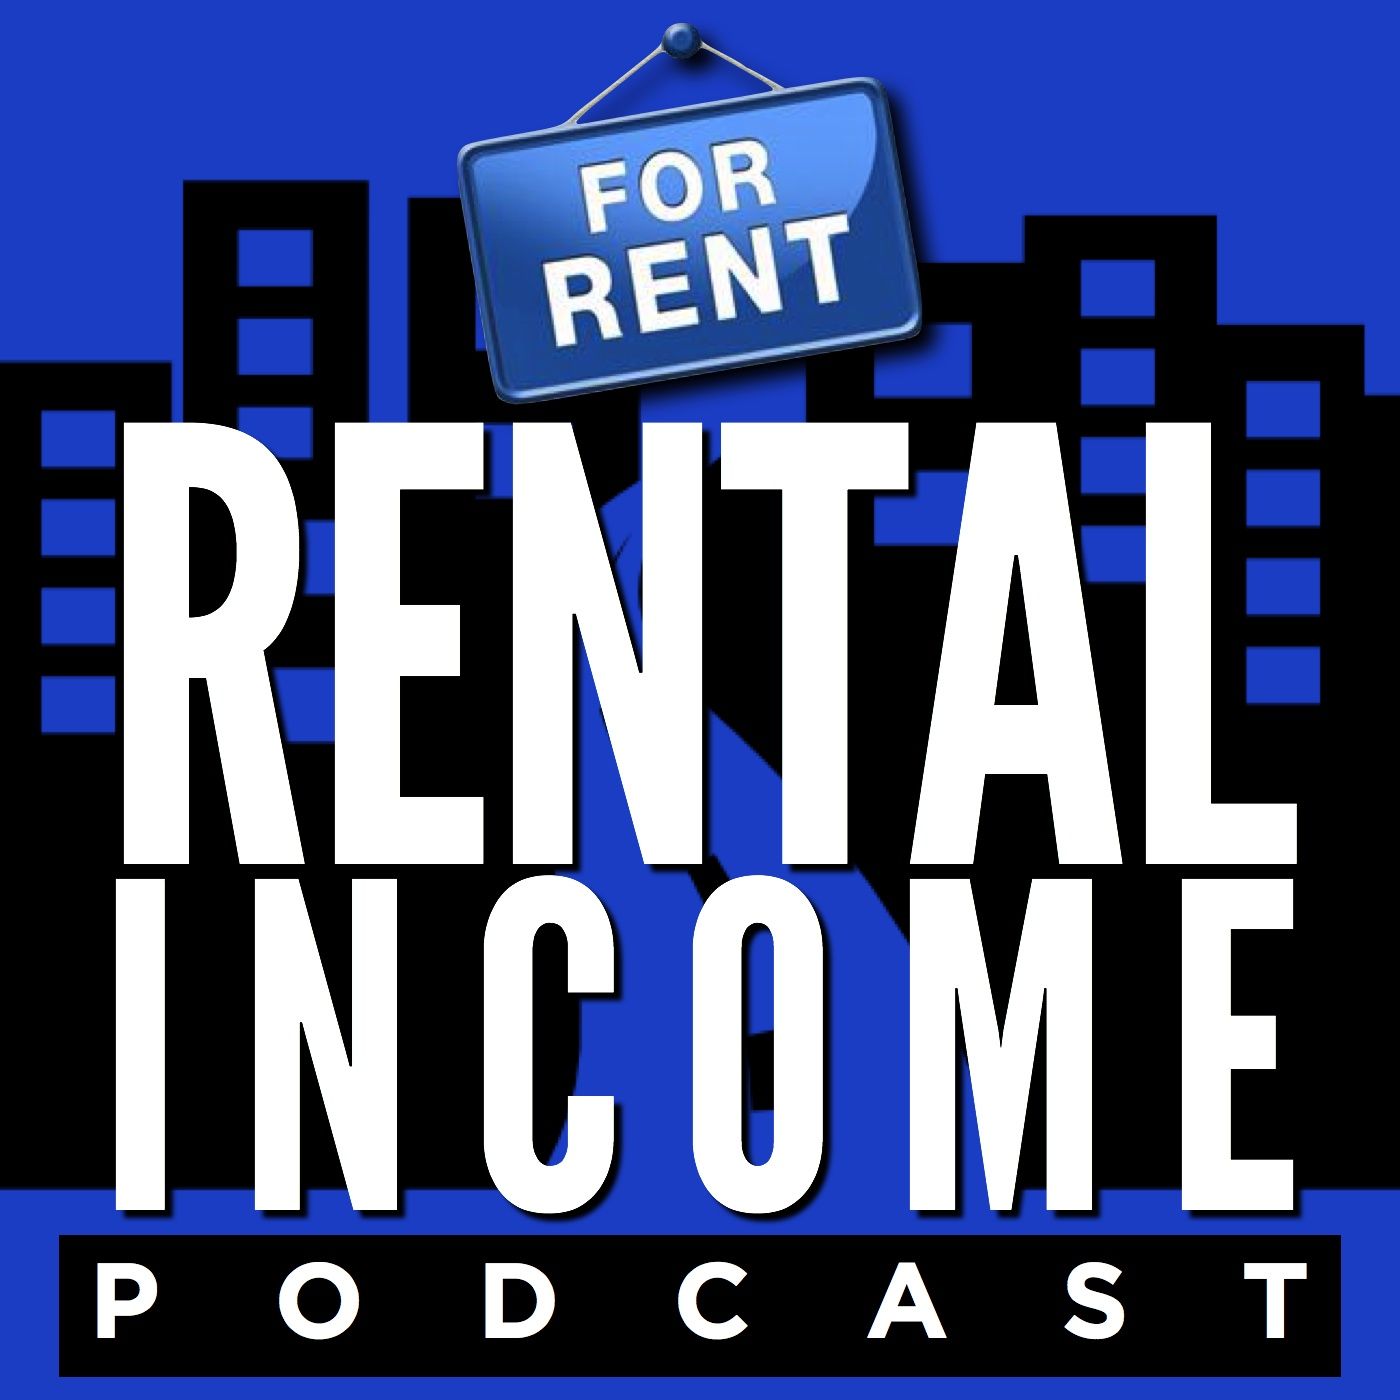 From $75K In Debt To $68K/Month In Rental Income With Steven Andrews (Ep 460)